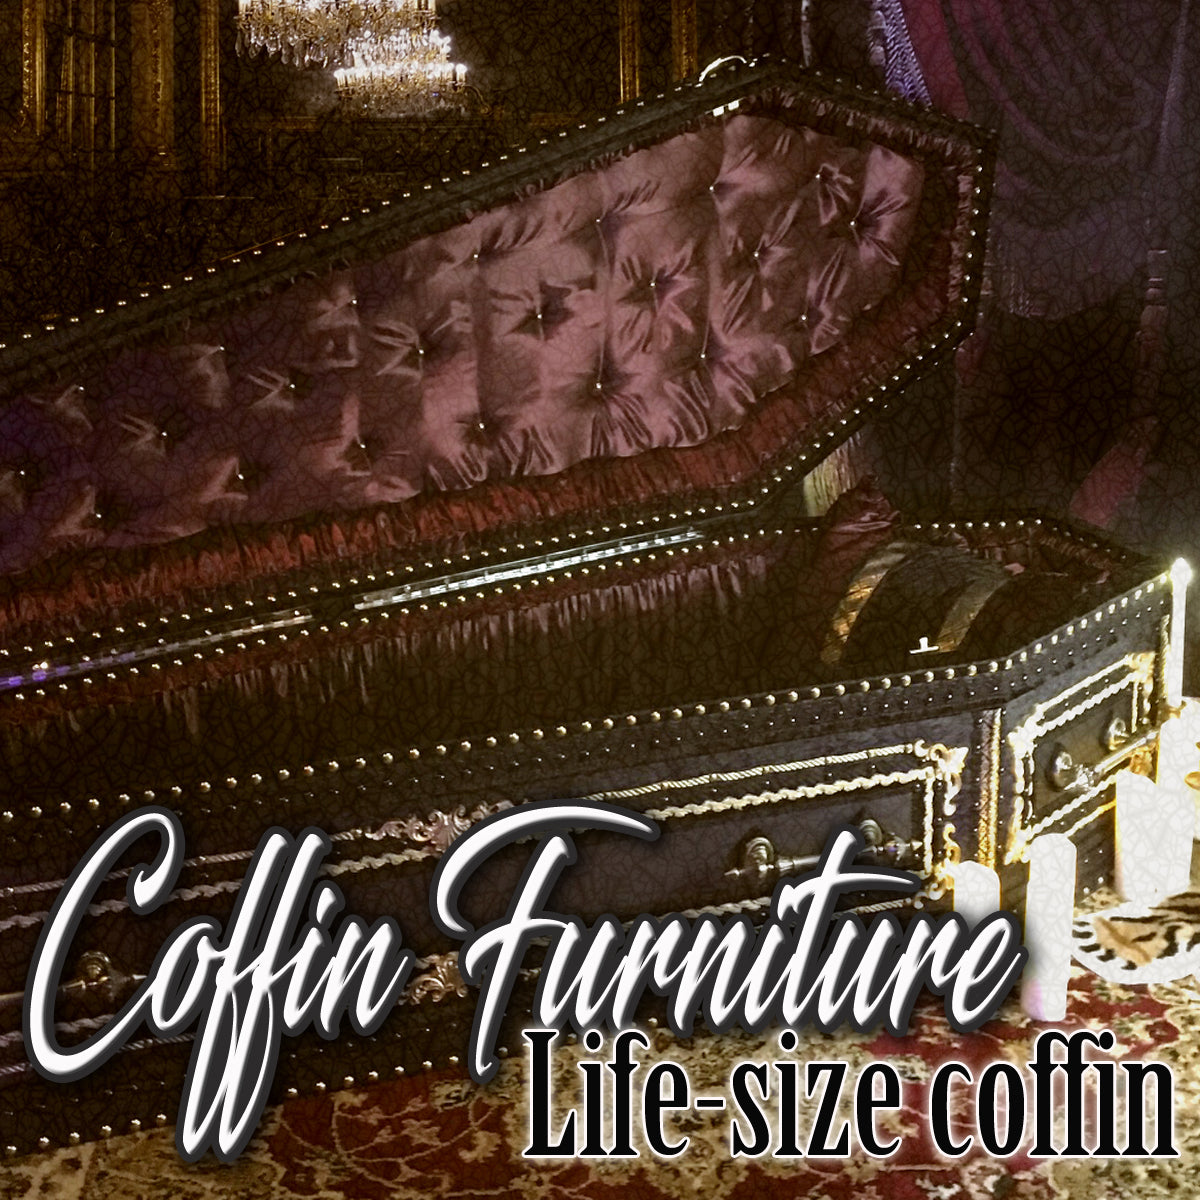 Coffin Furniture Life-size coffin